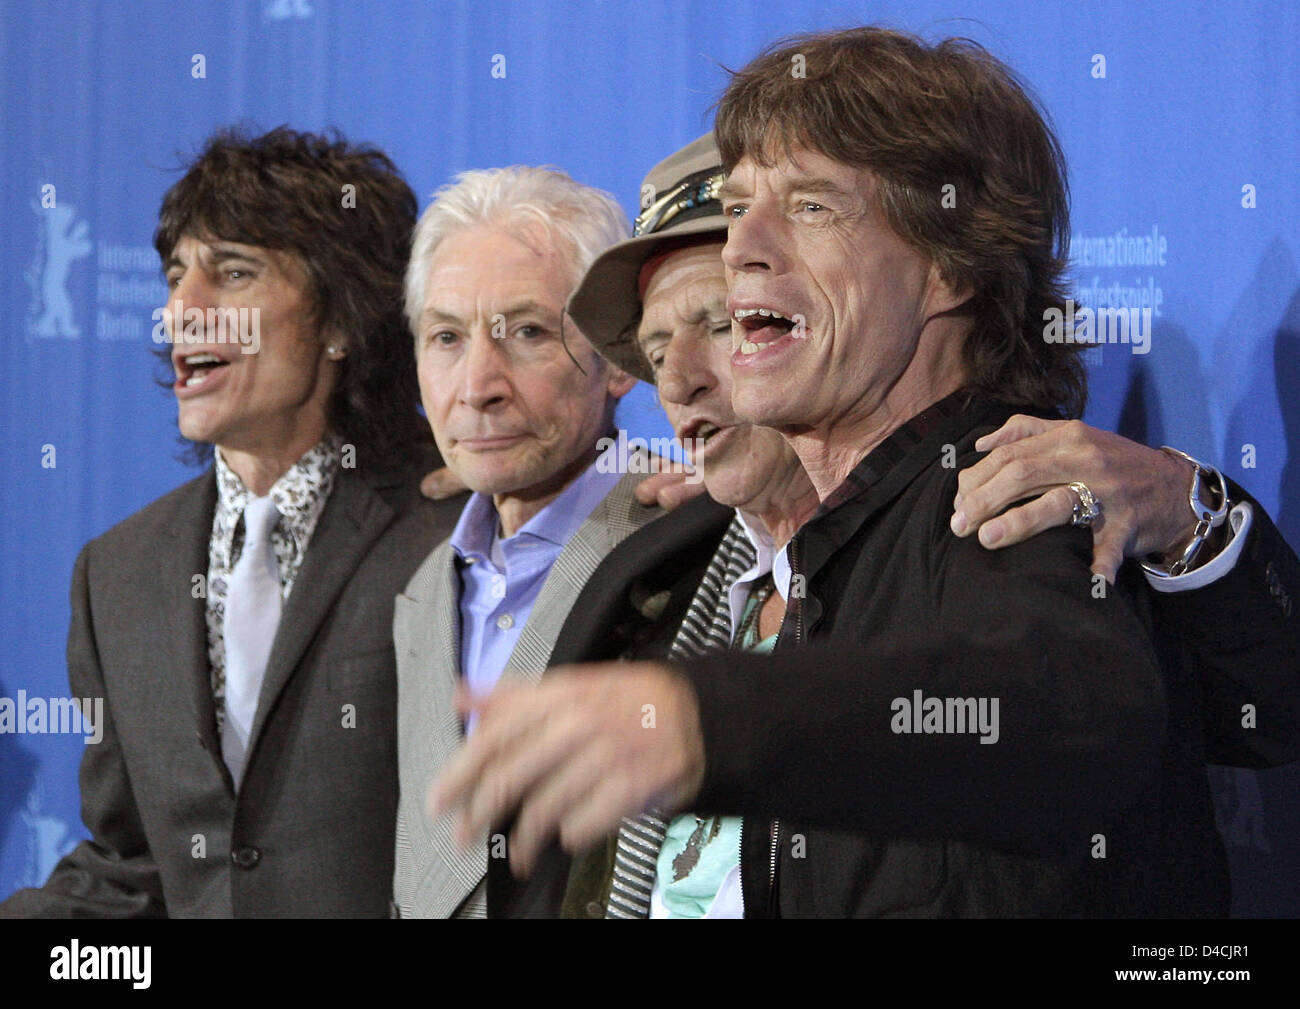 The Rolling Stones, Ron Wood (L-R), Charlie Watts, Keith Richards, Mick Jagger pose at the 58th Berlin International Film Festival in Berlin, Germany, 07 February 2008. The group stars in the concert video 'Shine a Light' directed by Martin Scorsese. 58th Berlinale runs from 07 to 17 February. Photo: Peer Grimm Stock Photo